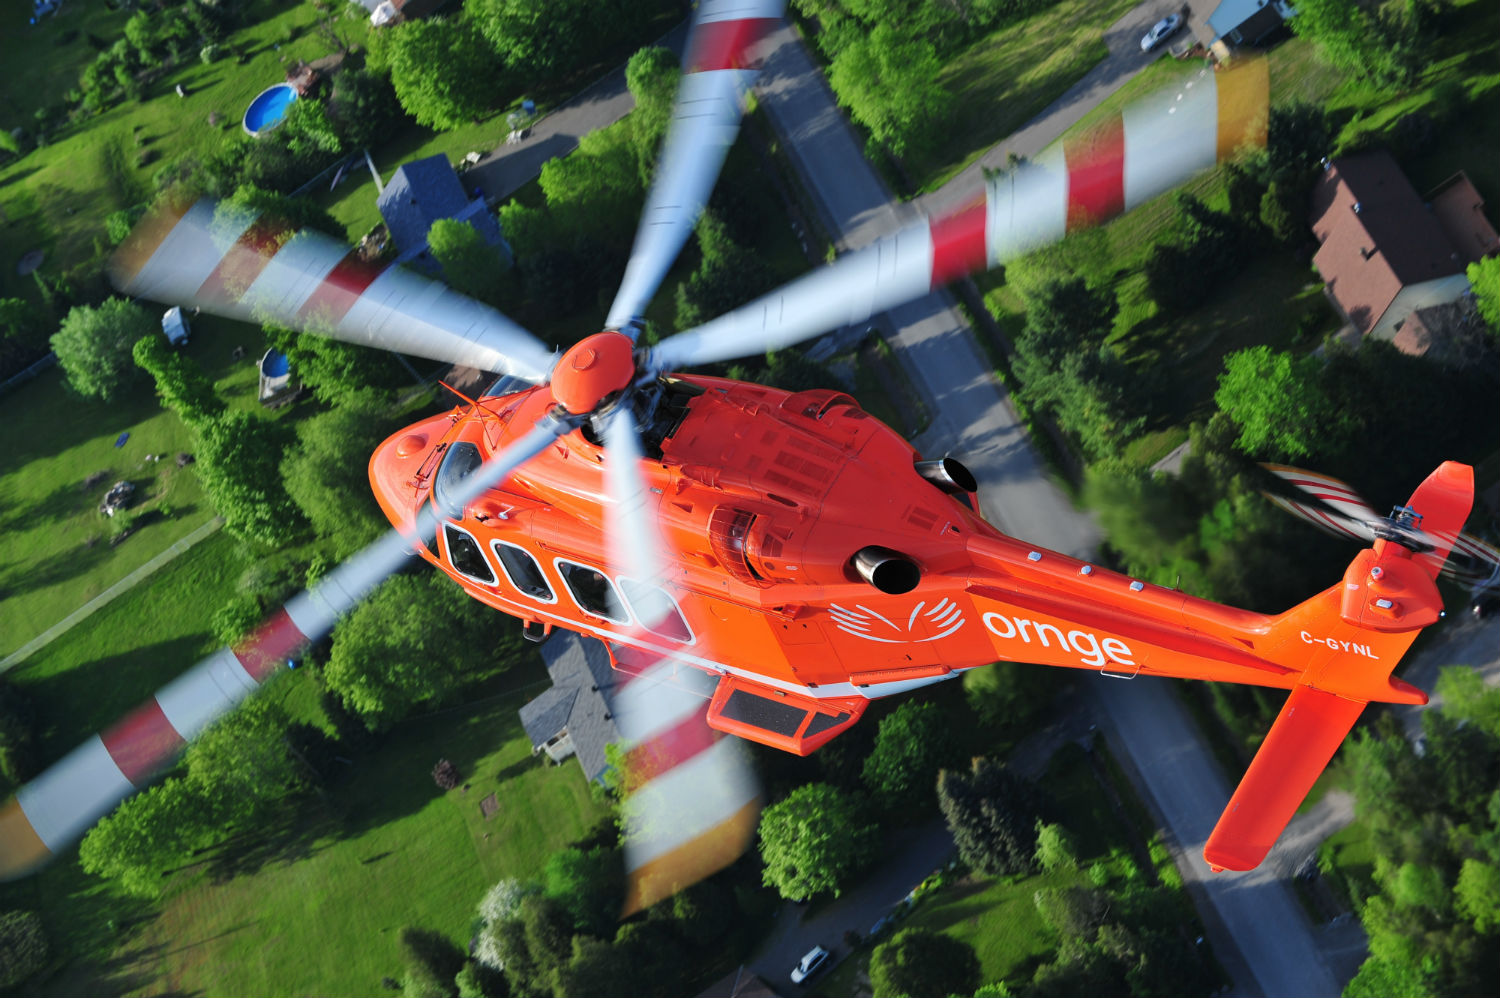 An Ornge Leonardo AW139 helicopter soars over the countryside.